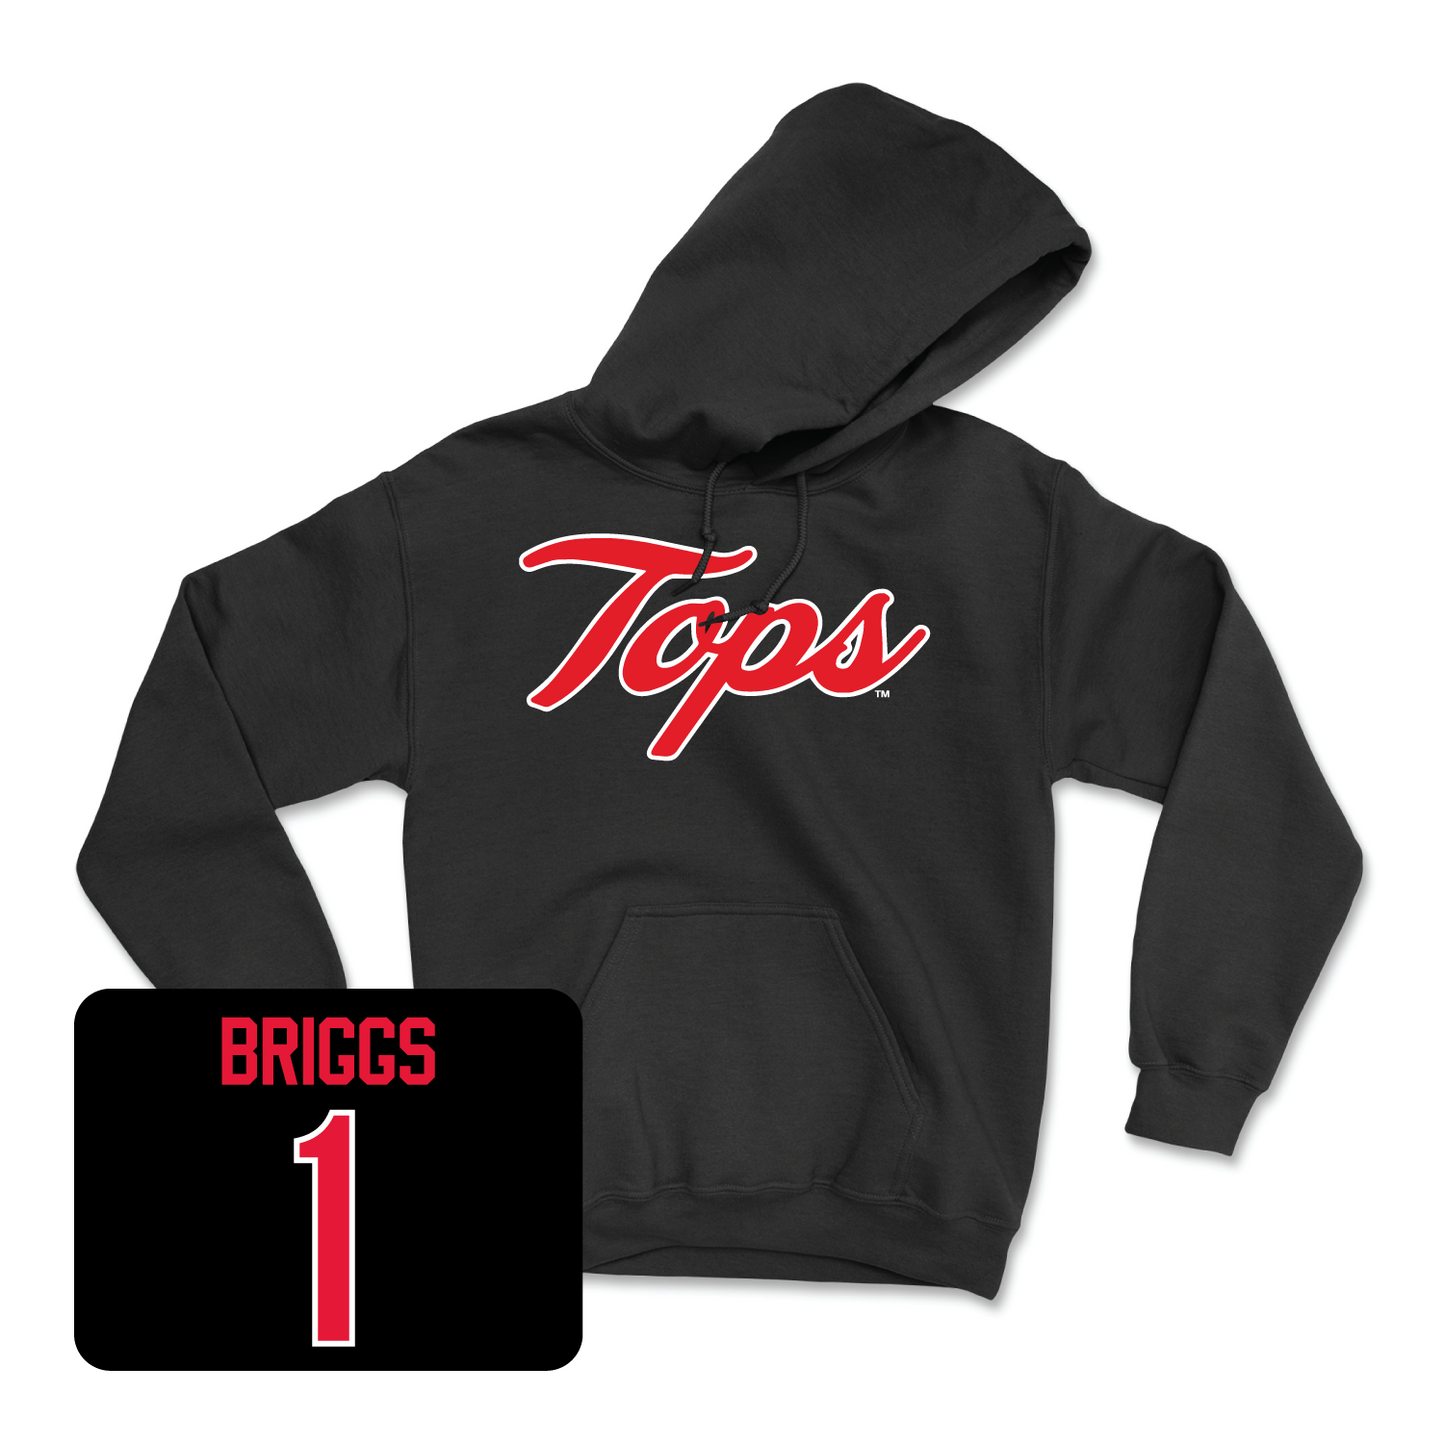 Black Women's Volleyball Tops Hoodie Youth Large / Paige Briggs | #1